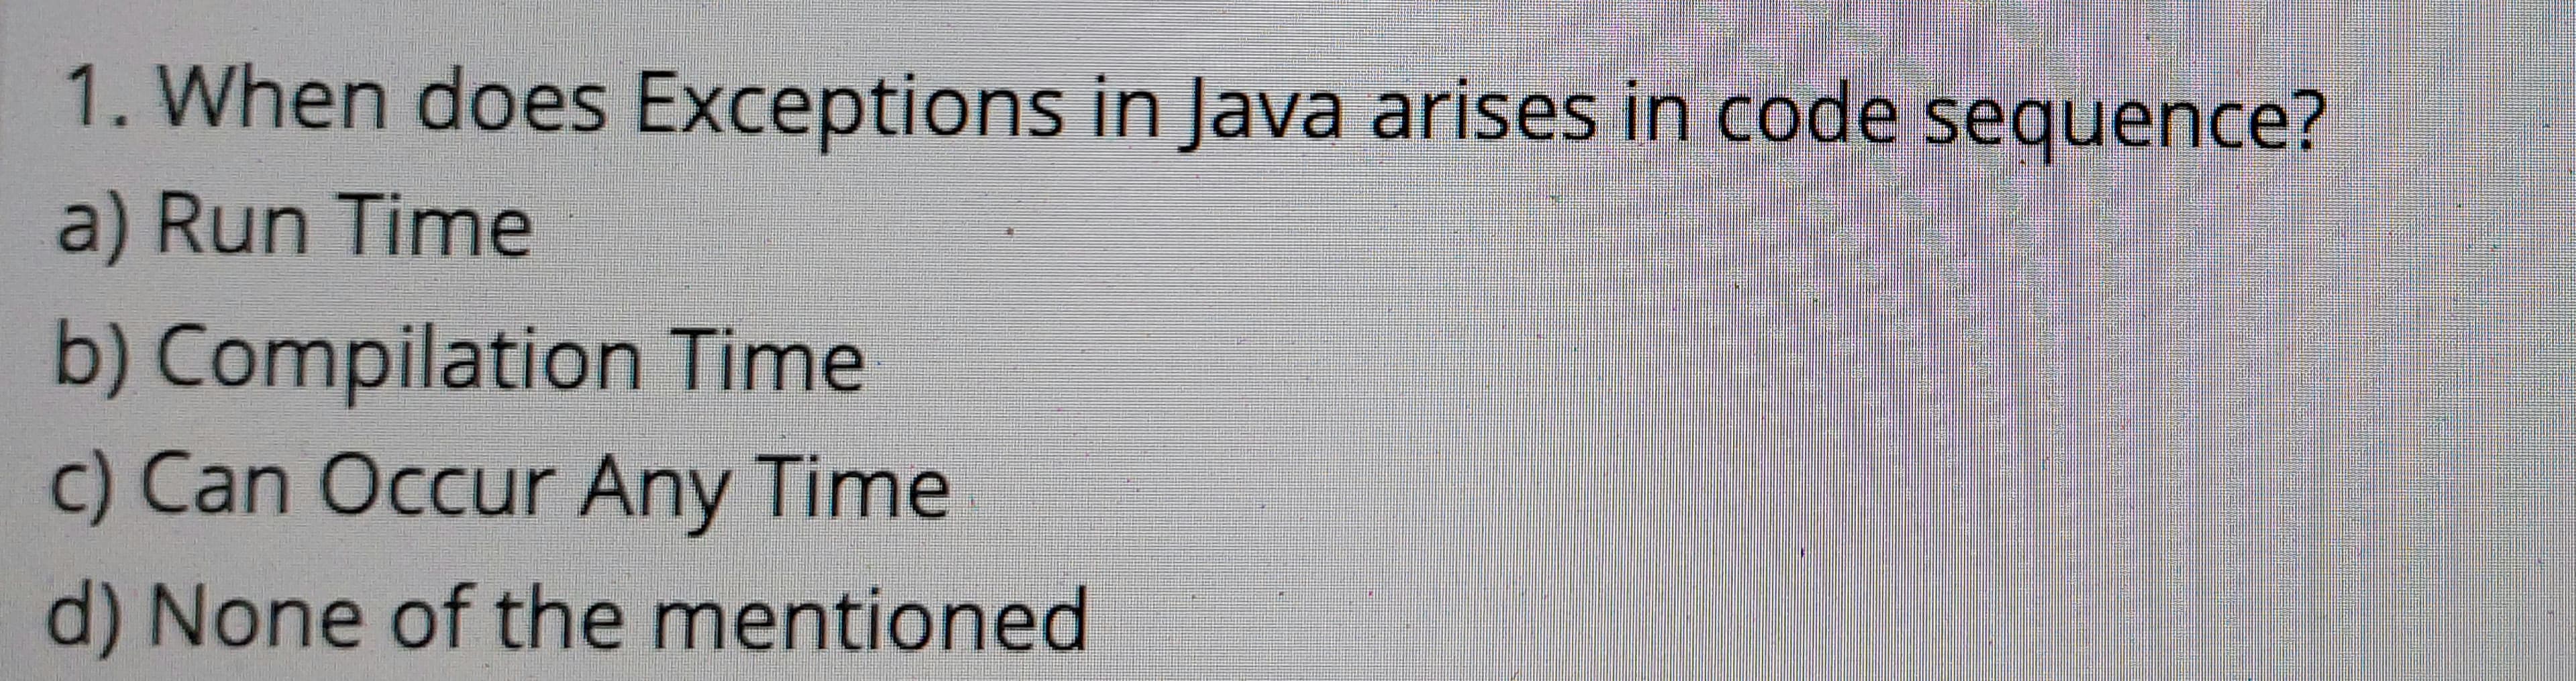 1. When does Exceptions in Java arises in code sequence?
a) Run Time
b) Compilation Time
c) Can Occur Any Time
d) None of the mentioned
